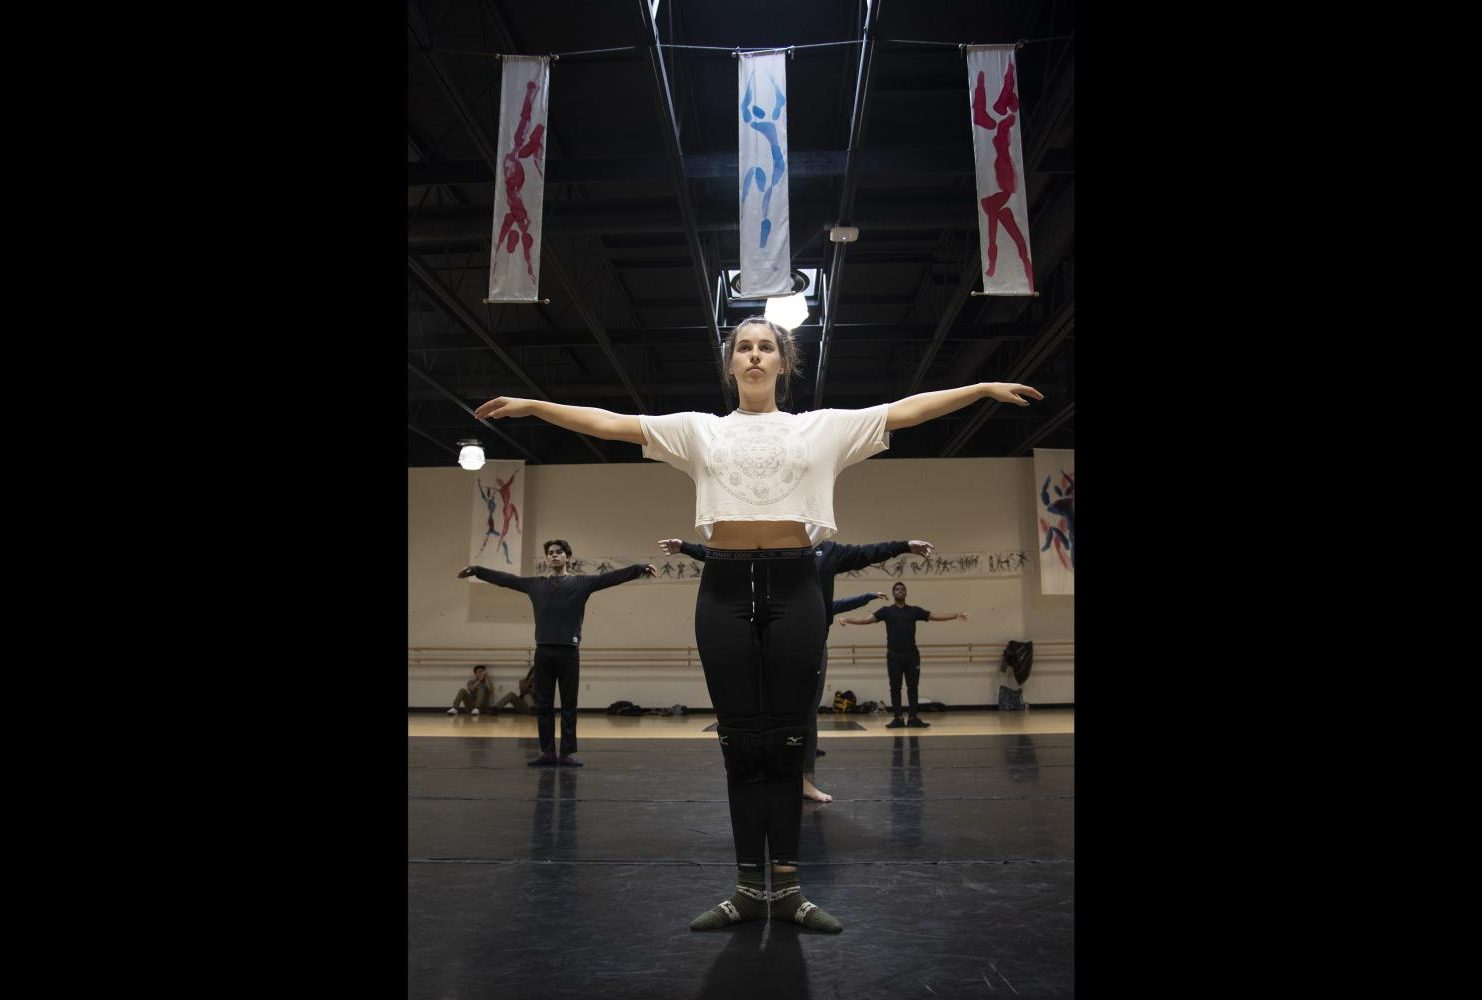 Cat Vandervan, teaching assistant, leads warm ups in the American River College dance studio during Dance Production: Studio & Stage, on Feb. 6, 2019. (Photo by Ashely Hayes-Stone)